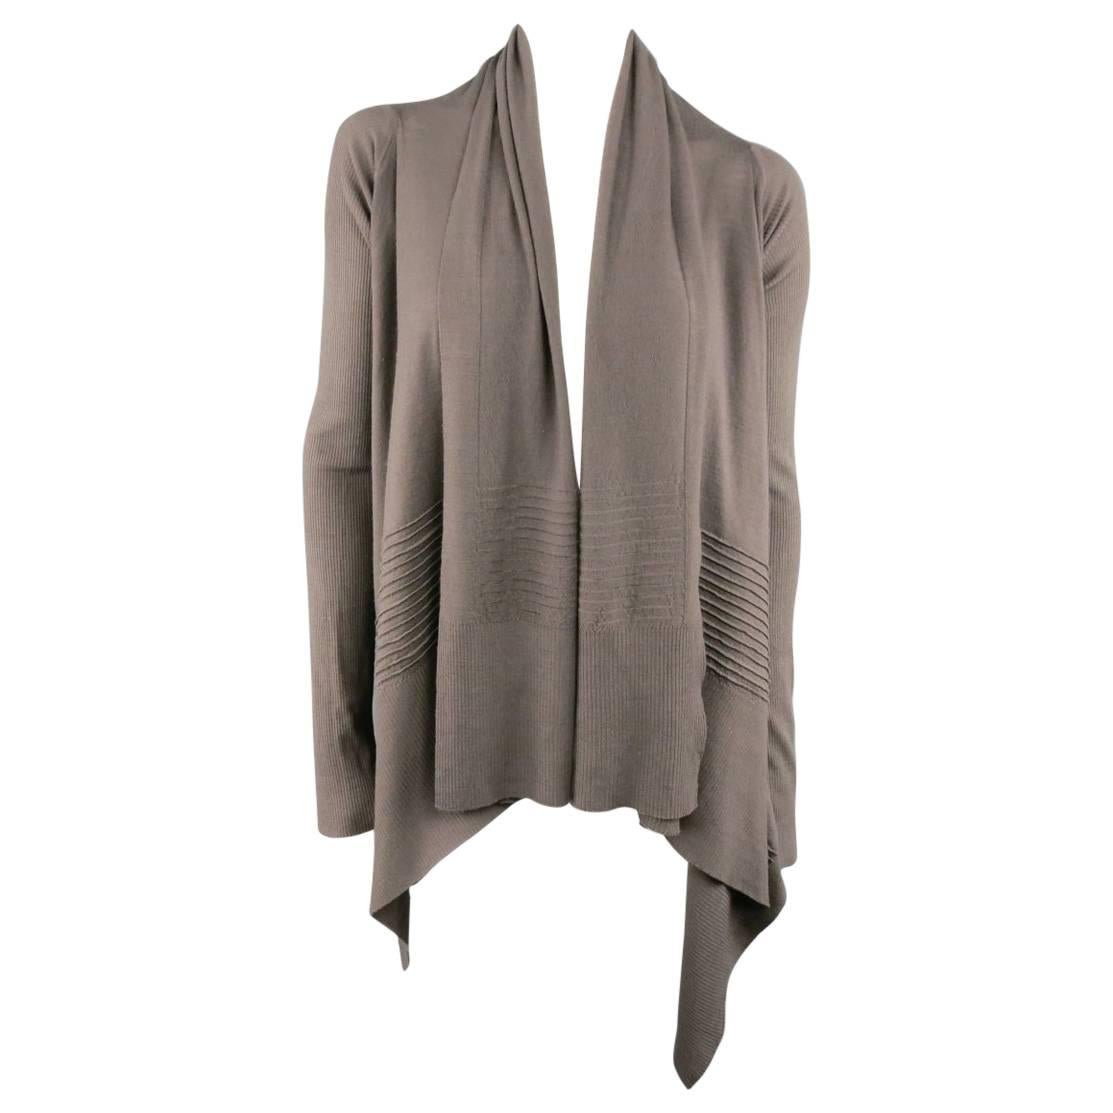 RICK OWENS Cardigan - Women's 2013 - Size S Taupe Ribbed Sleeve Draped